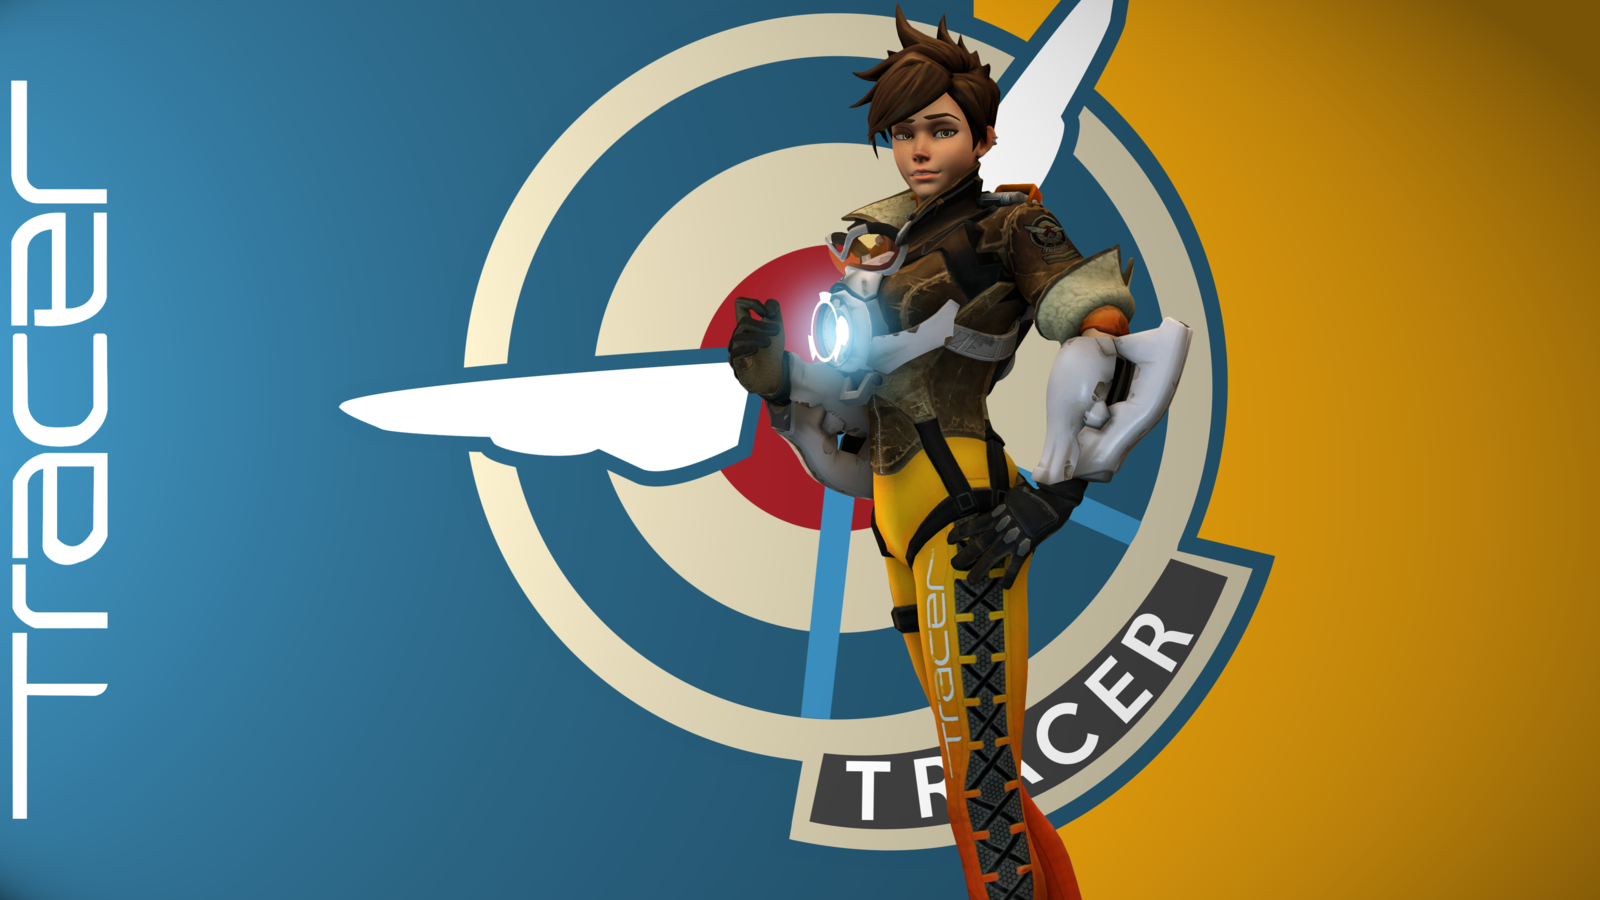 Overwatch UHD Tracer wallpaper 3 by USSRIV on